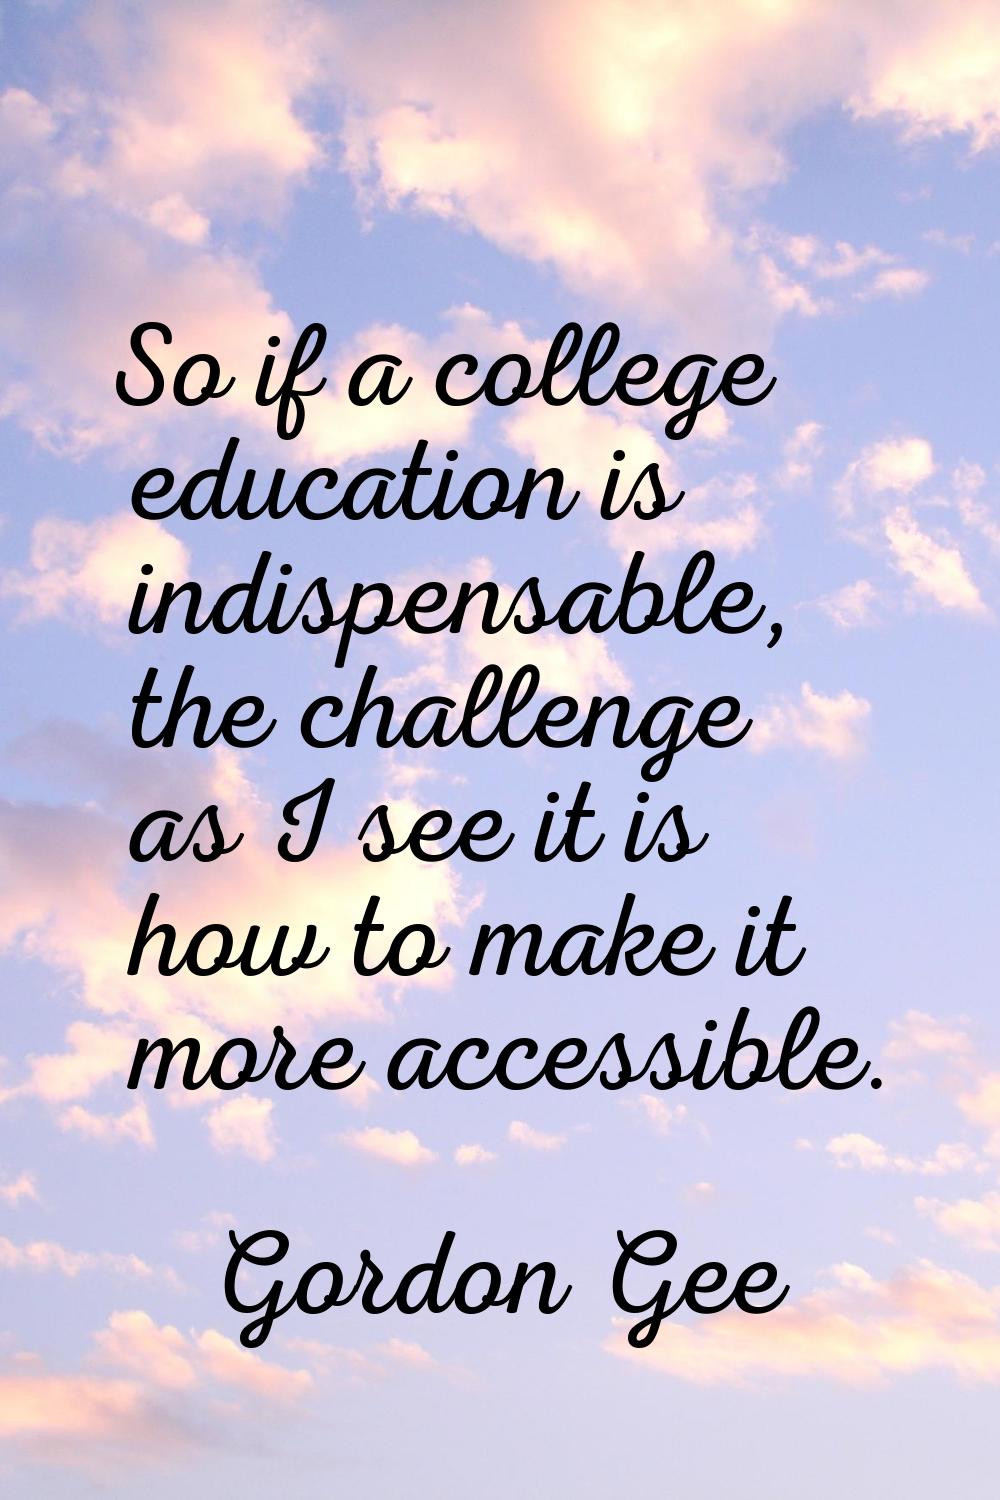 So if a college education is indispensable, the challenge as I see it is how to make it more access